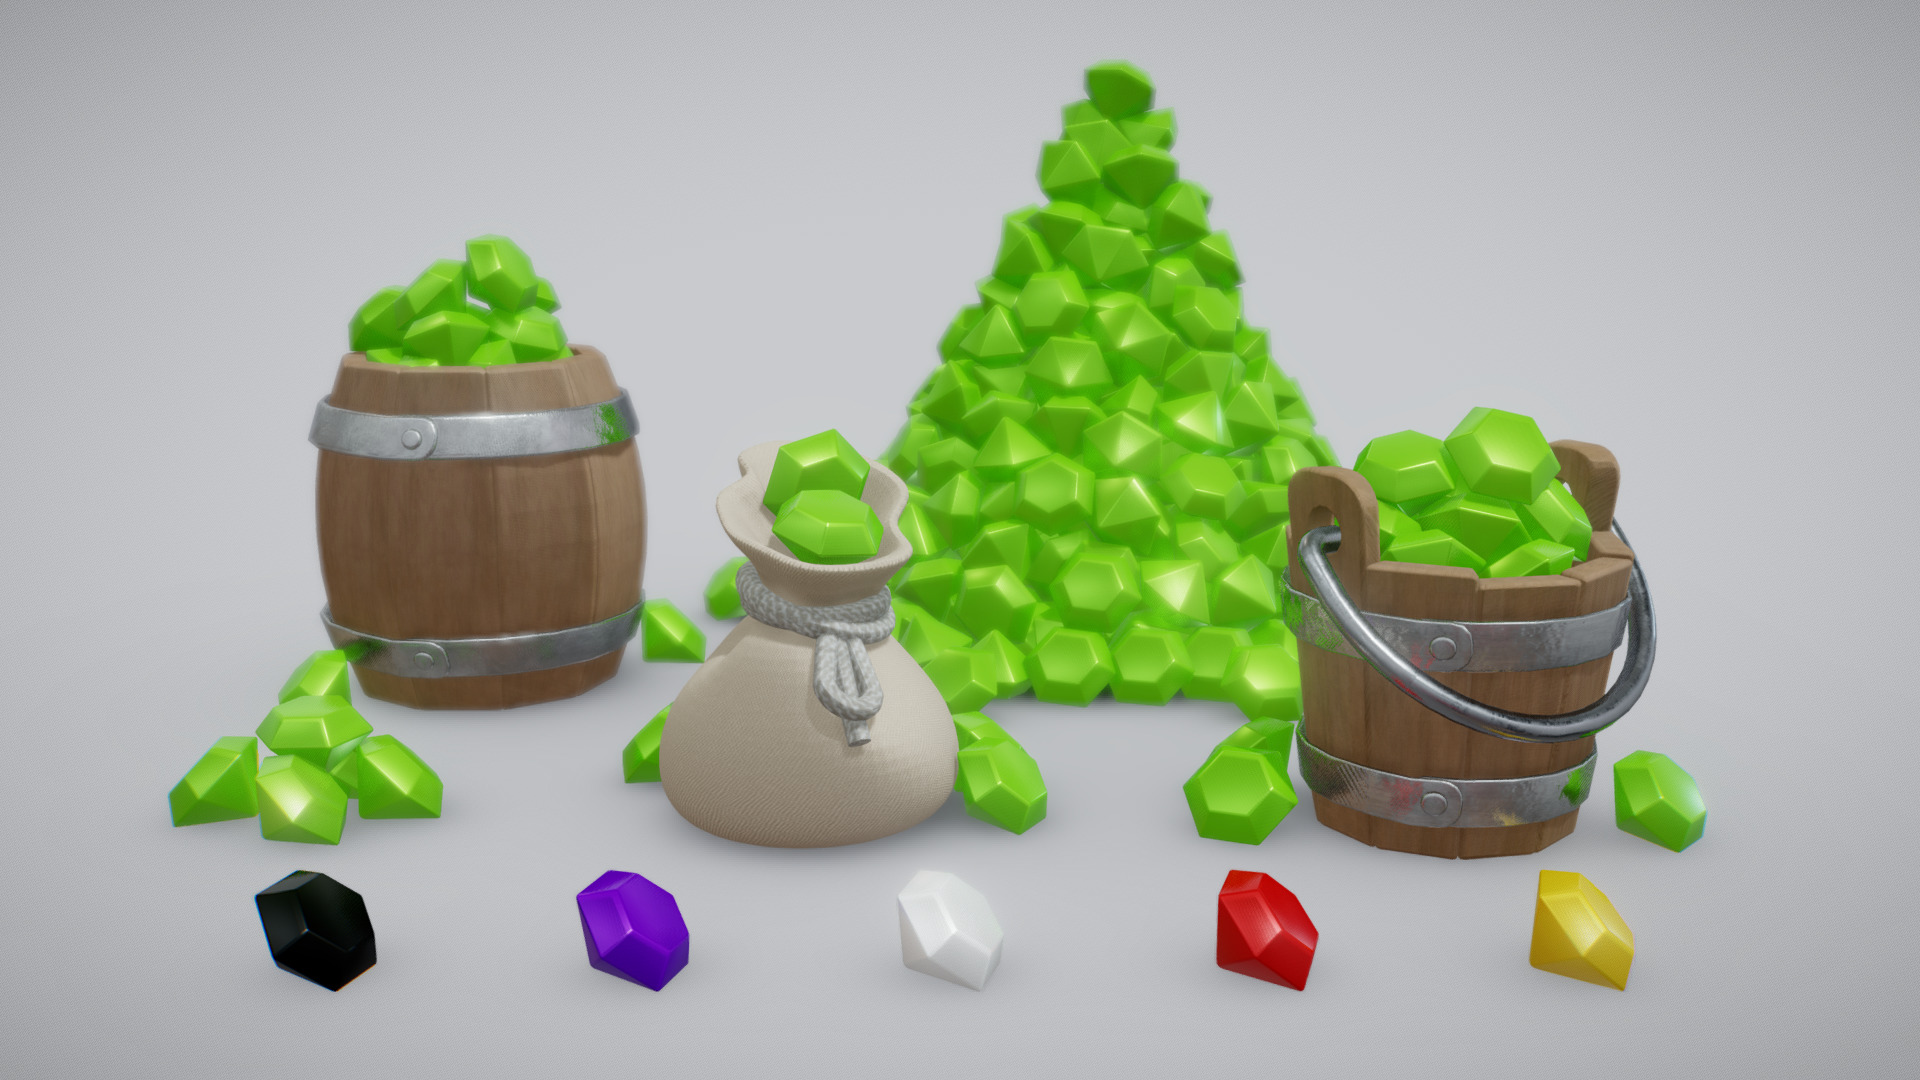 3D model Classic gems pack - This is a 3D model of the Classic gems pack. The 3D model is about a group of small toys.